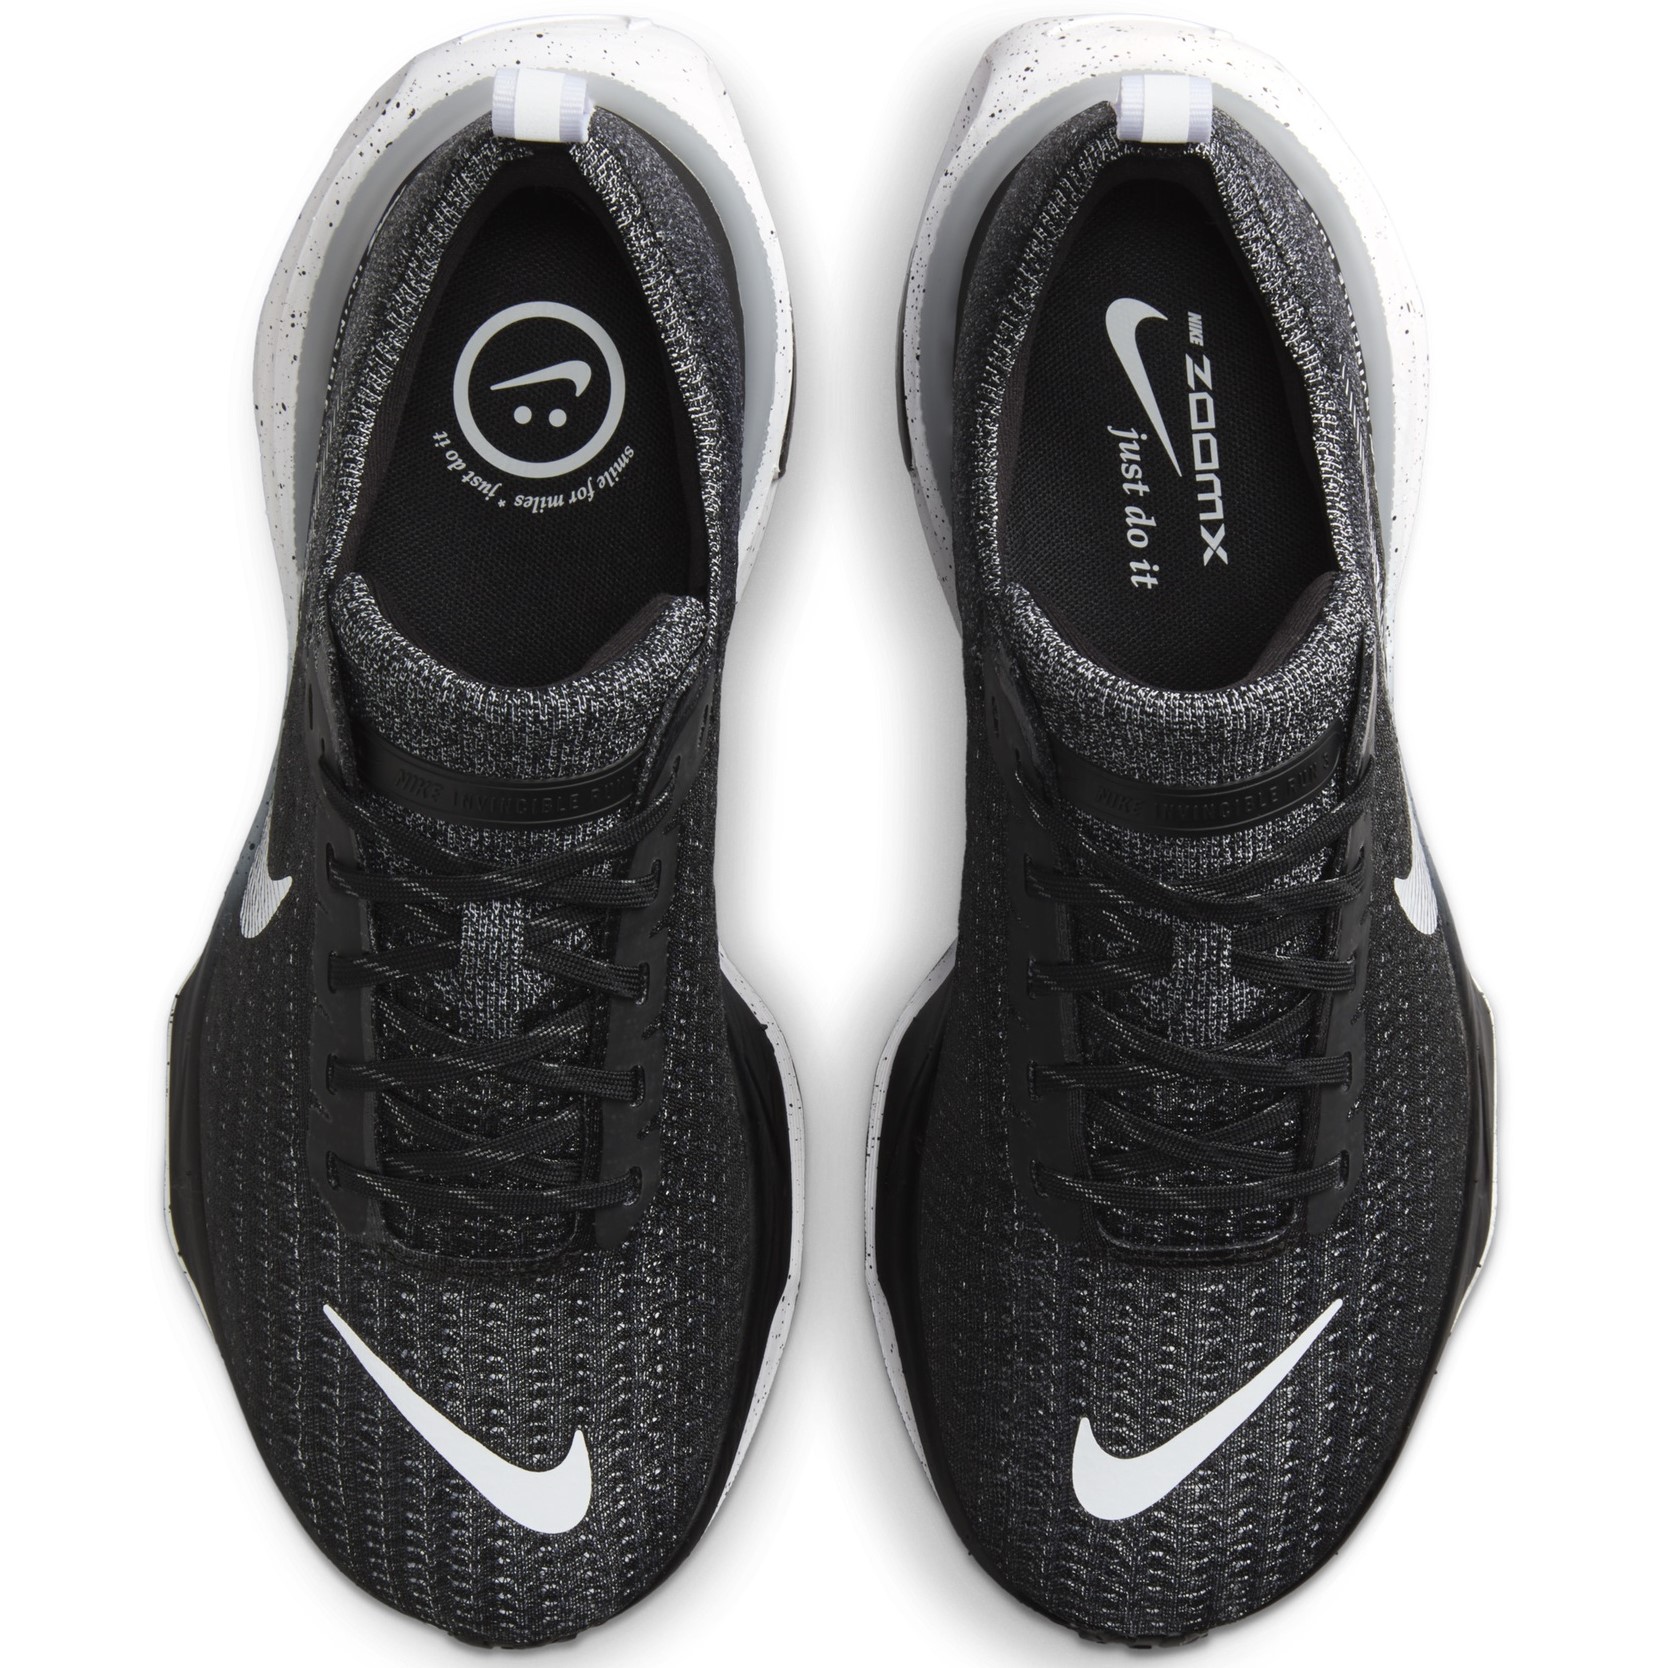 GIÀY THỂ THAO NIKE NAM INVINCIBLE 3 ROAD RUNNING SHOES BLACK DR2615-002 2